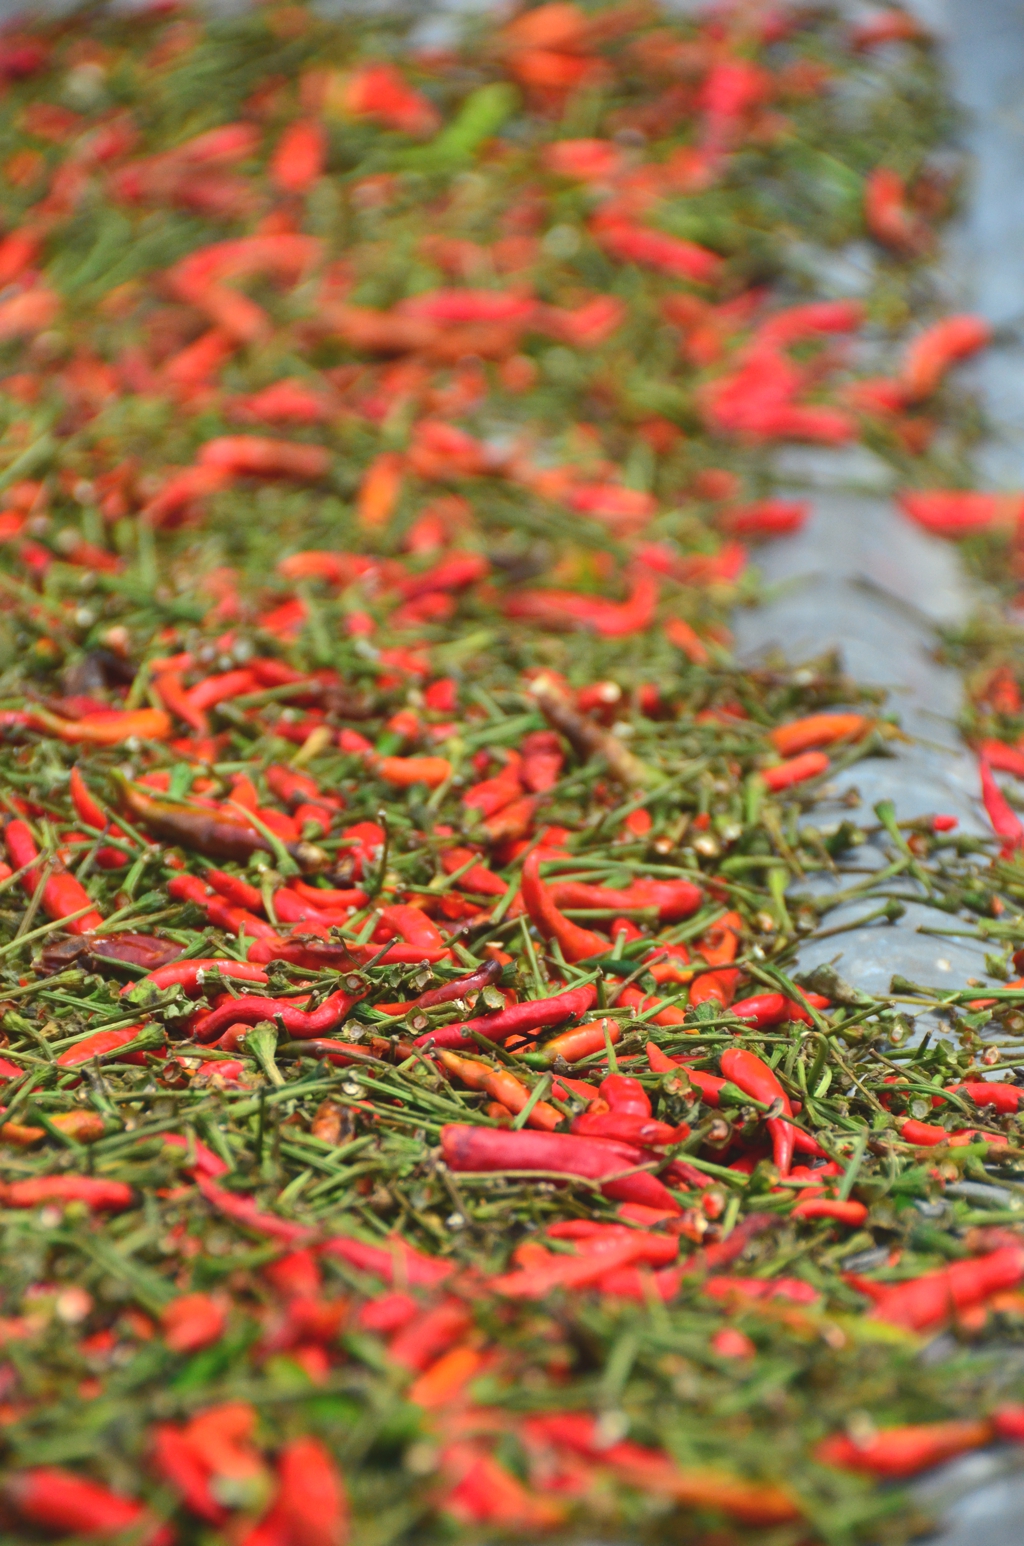 Visiting the west bank of the Chao Phraya isn't just good for temples, but also for getting a glimpse into the life of everyday Thais, some of whom, for example, grow and dry chili peppers to make a living 